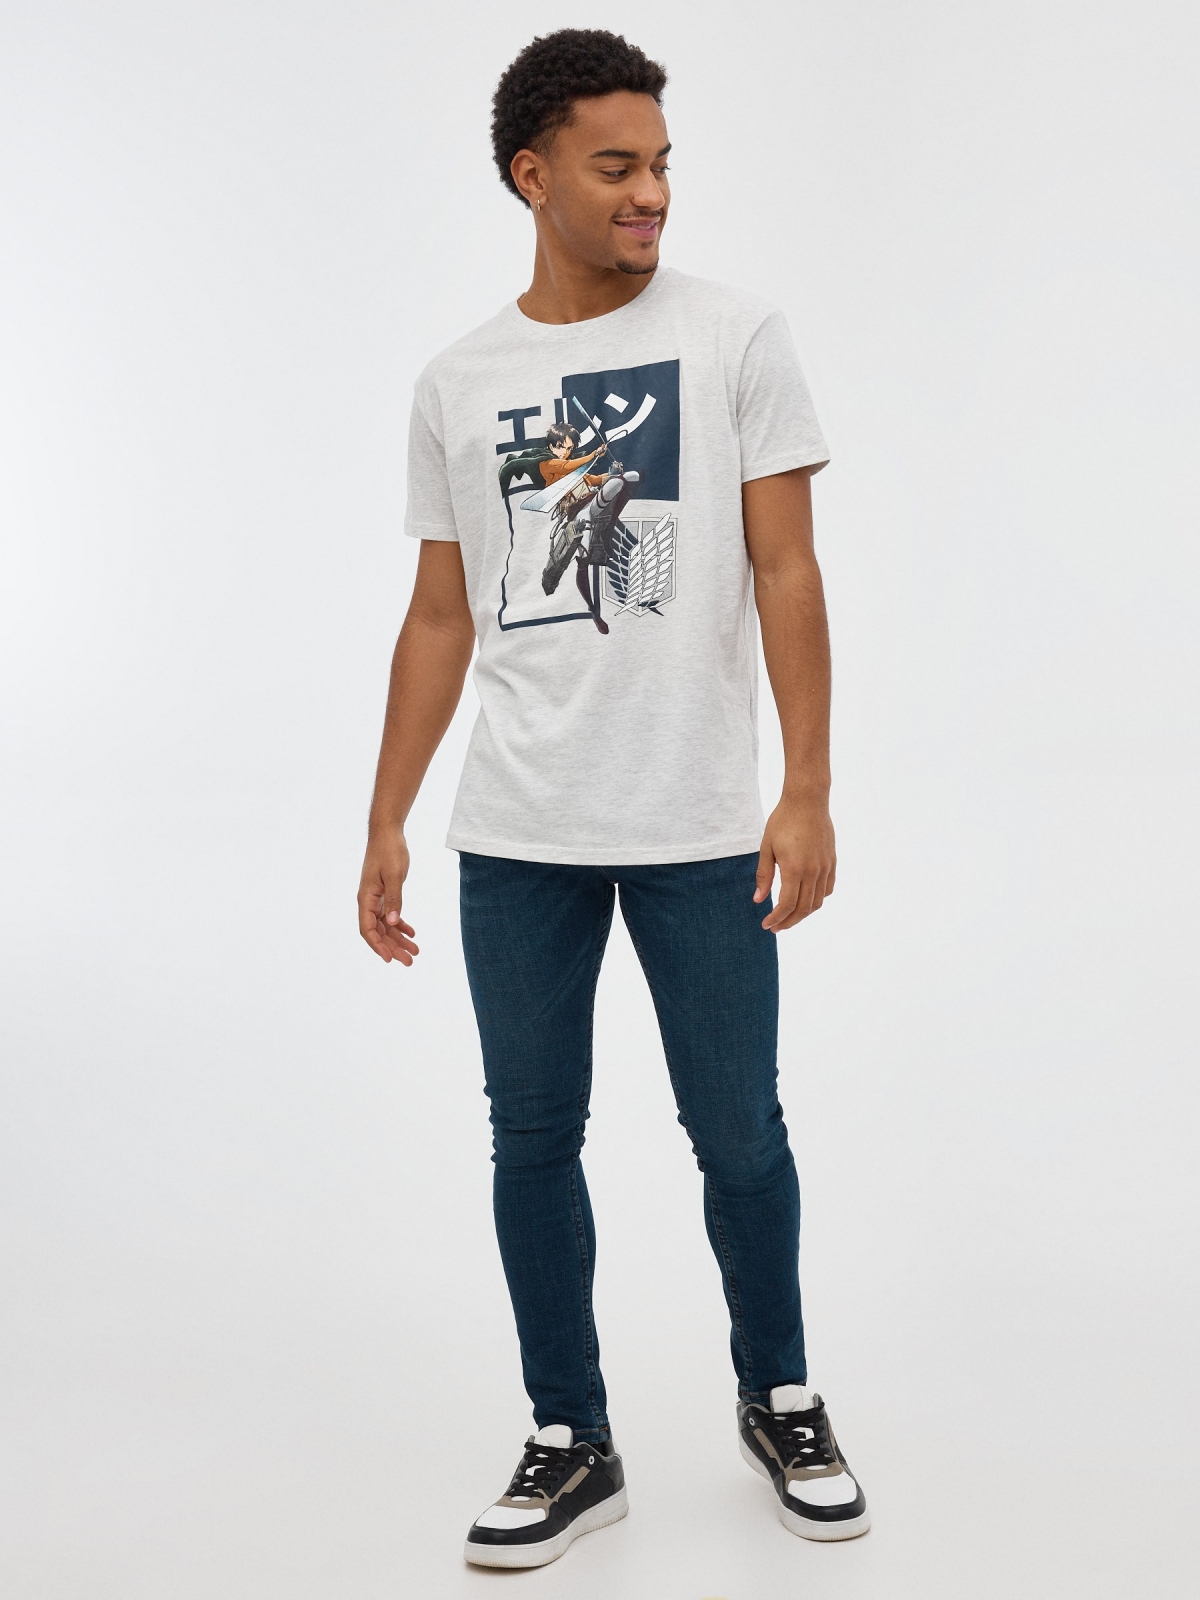 Attack on Titan T-shirt grey front view